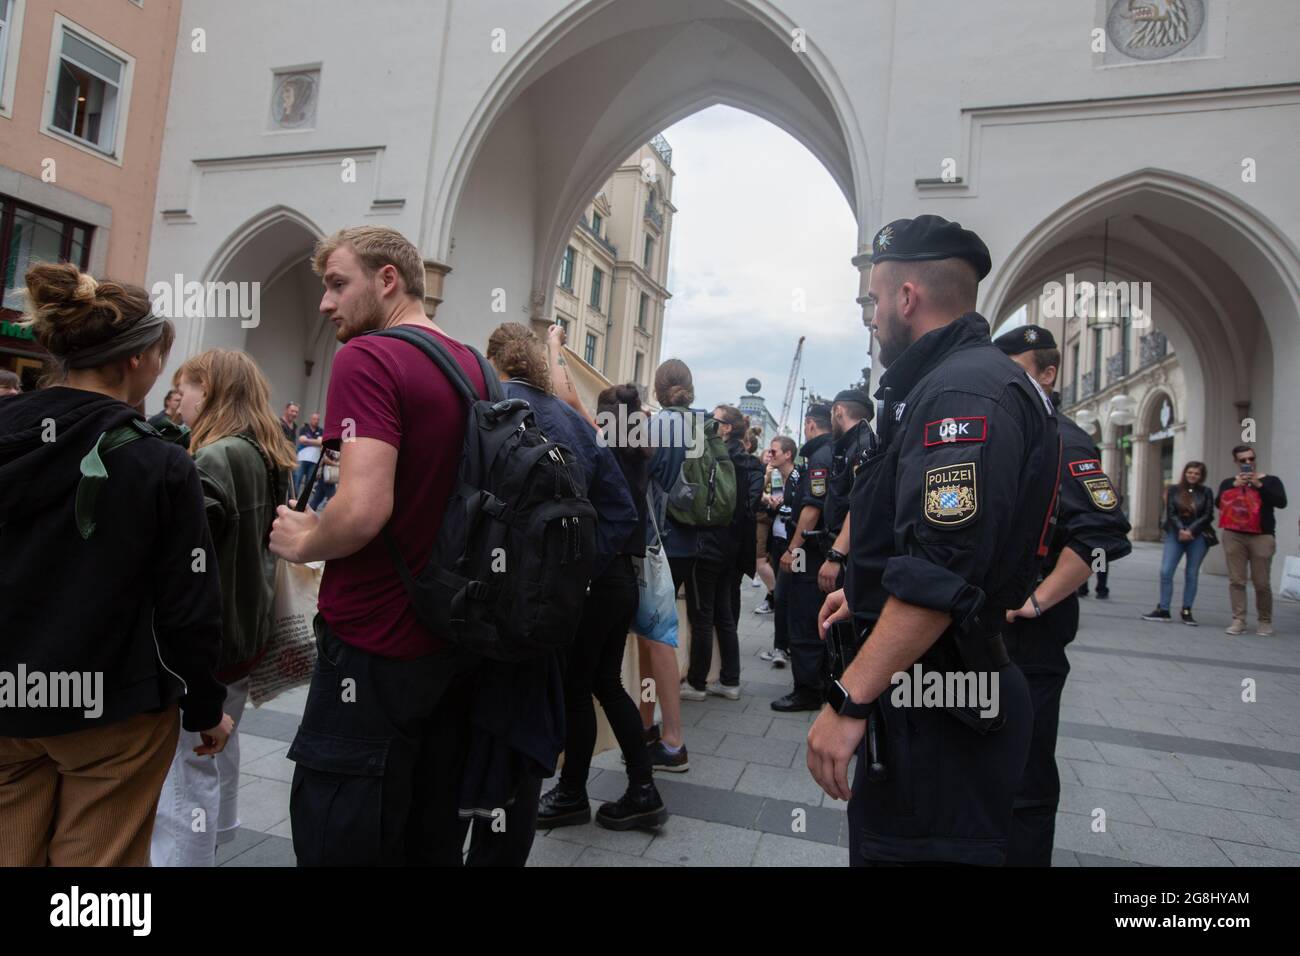 Munich, Germany. 25th May, 2019. Police of the USK standing behind the counter protest. The neonazi party NPD had a stand in Munich for the upcoming European Elections. (Photo by Alexander Pohl/Sipa USA) Credit: Sipa USA/Alamy Live News Stock Photo